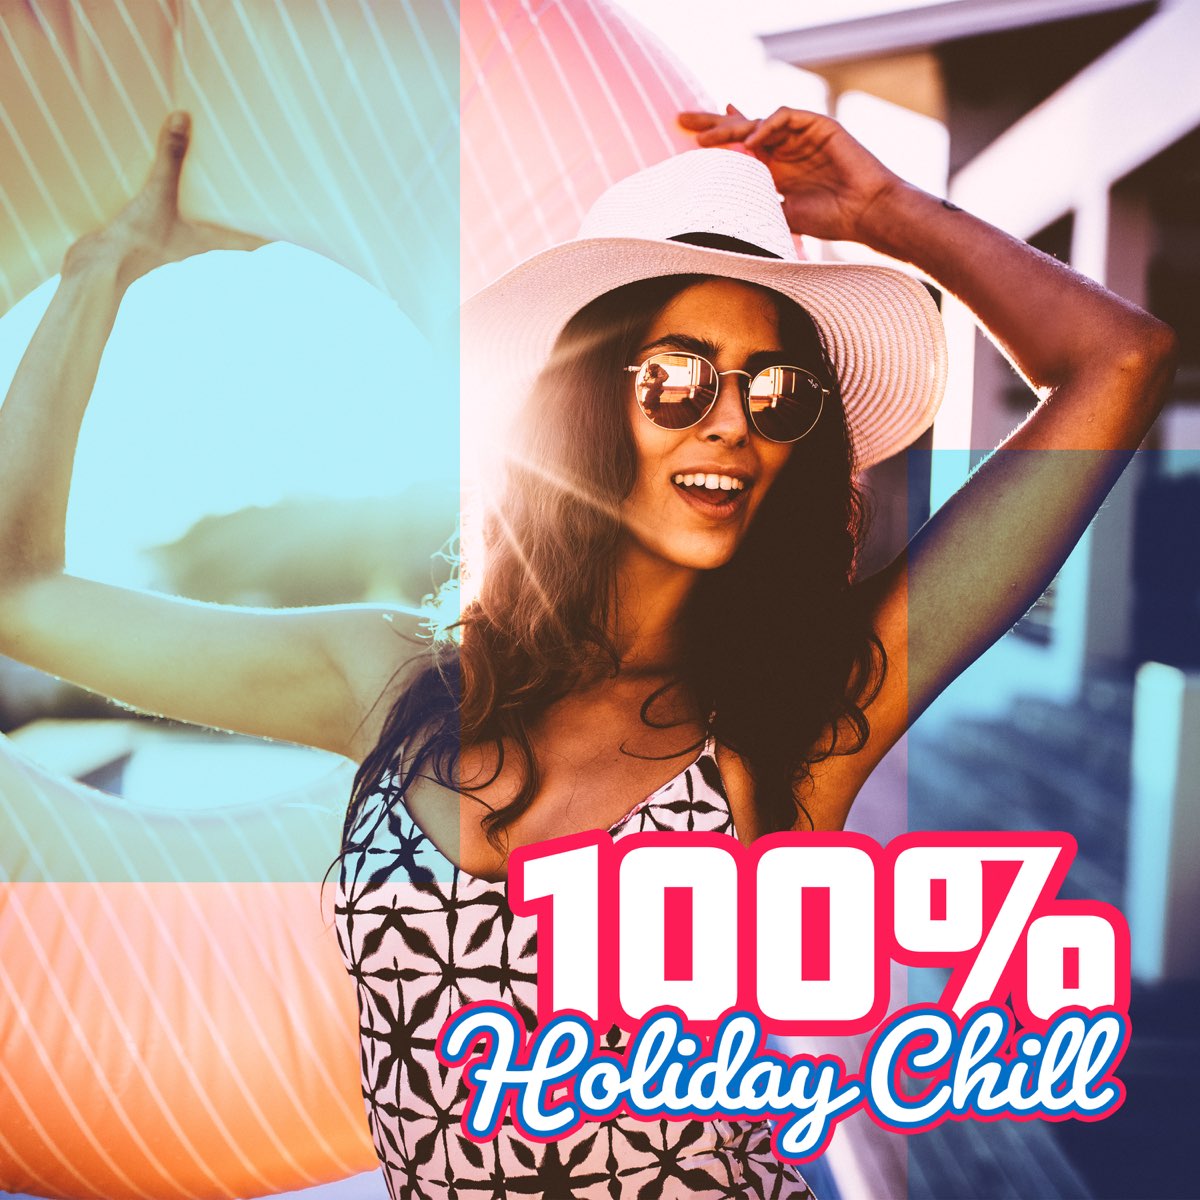 Summer Lounge - радио рекорд. Summer Lounge. Chilly Holliday. Clony Chill del Mar Inc feat. Mirjam - Drive. Dj chill